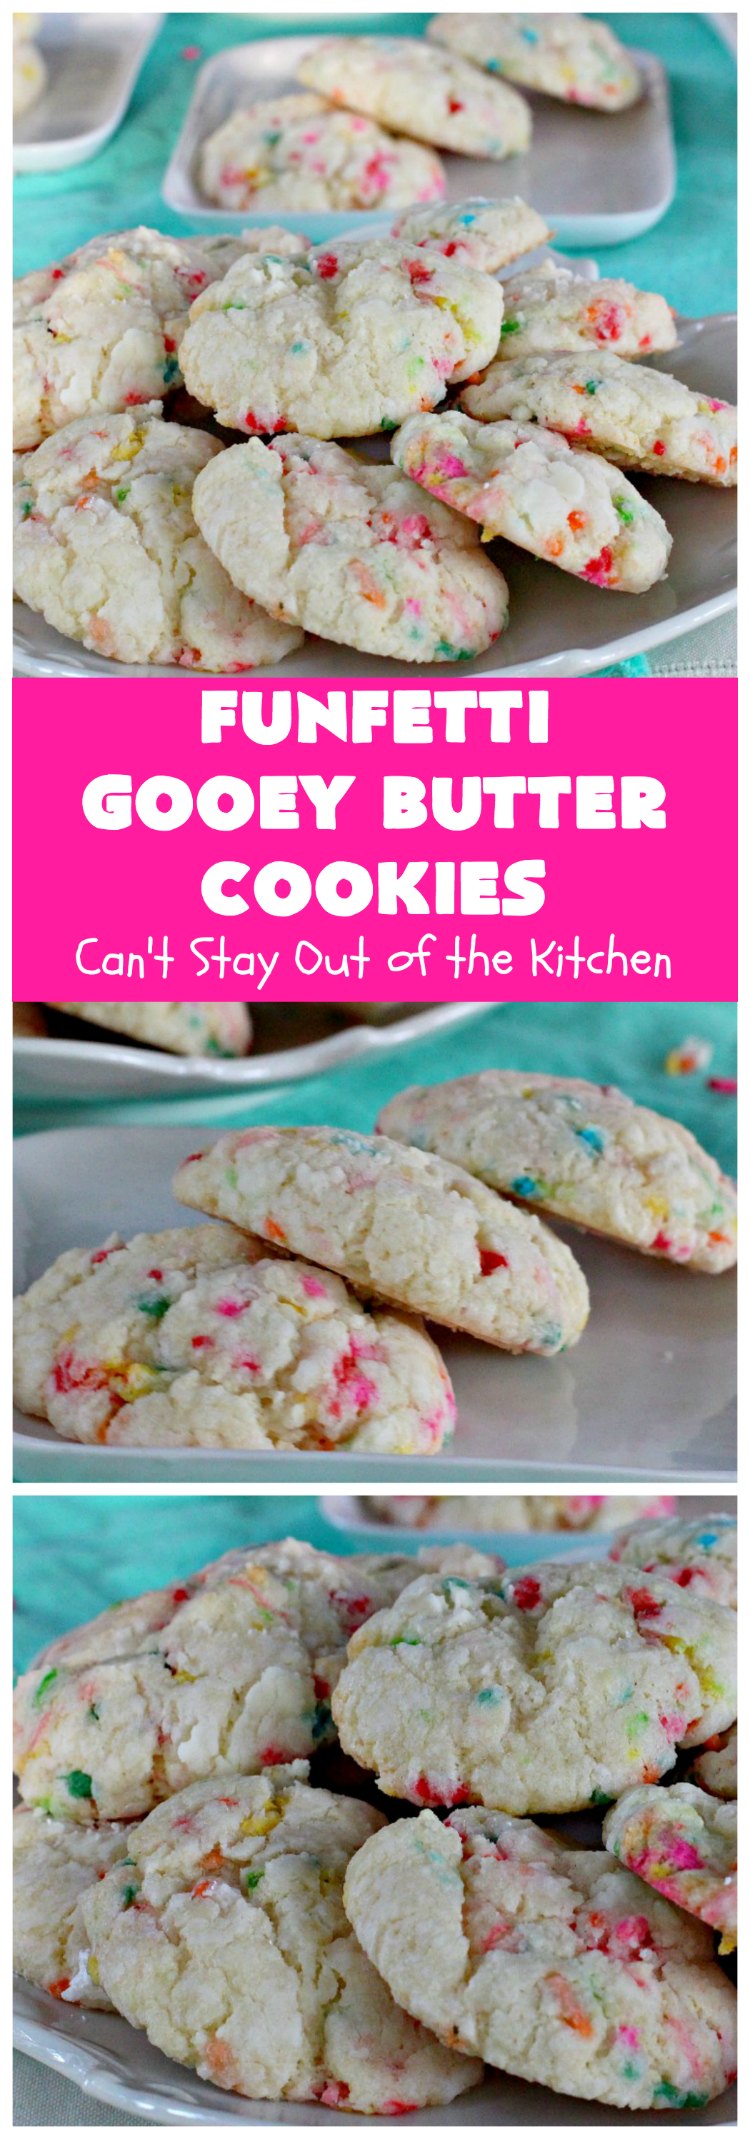 Funfetti Gooey Butter Cookies | Can't Stay Out of the Kitchen